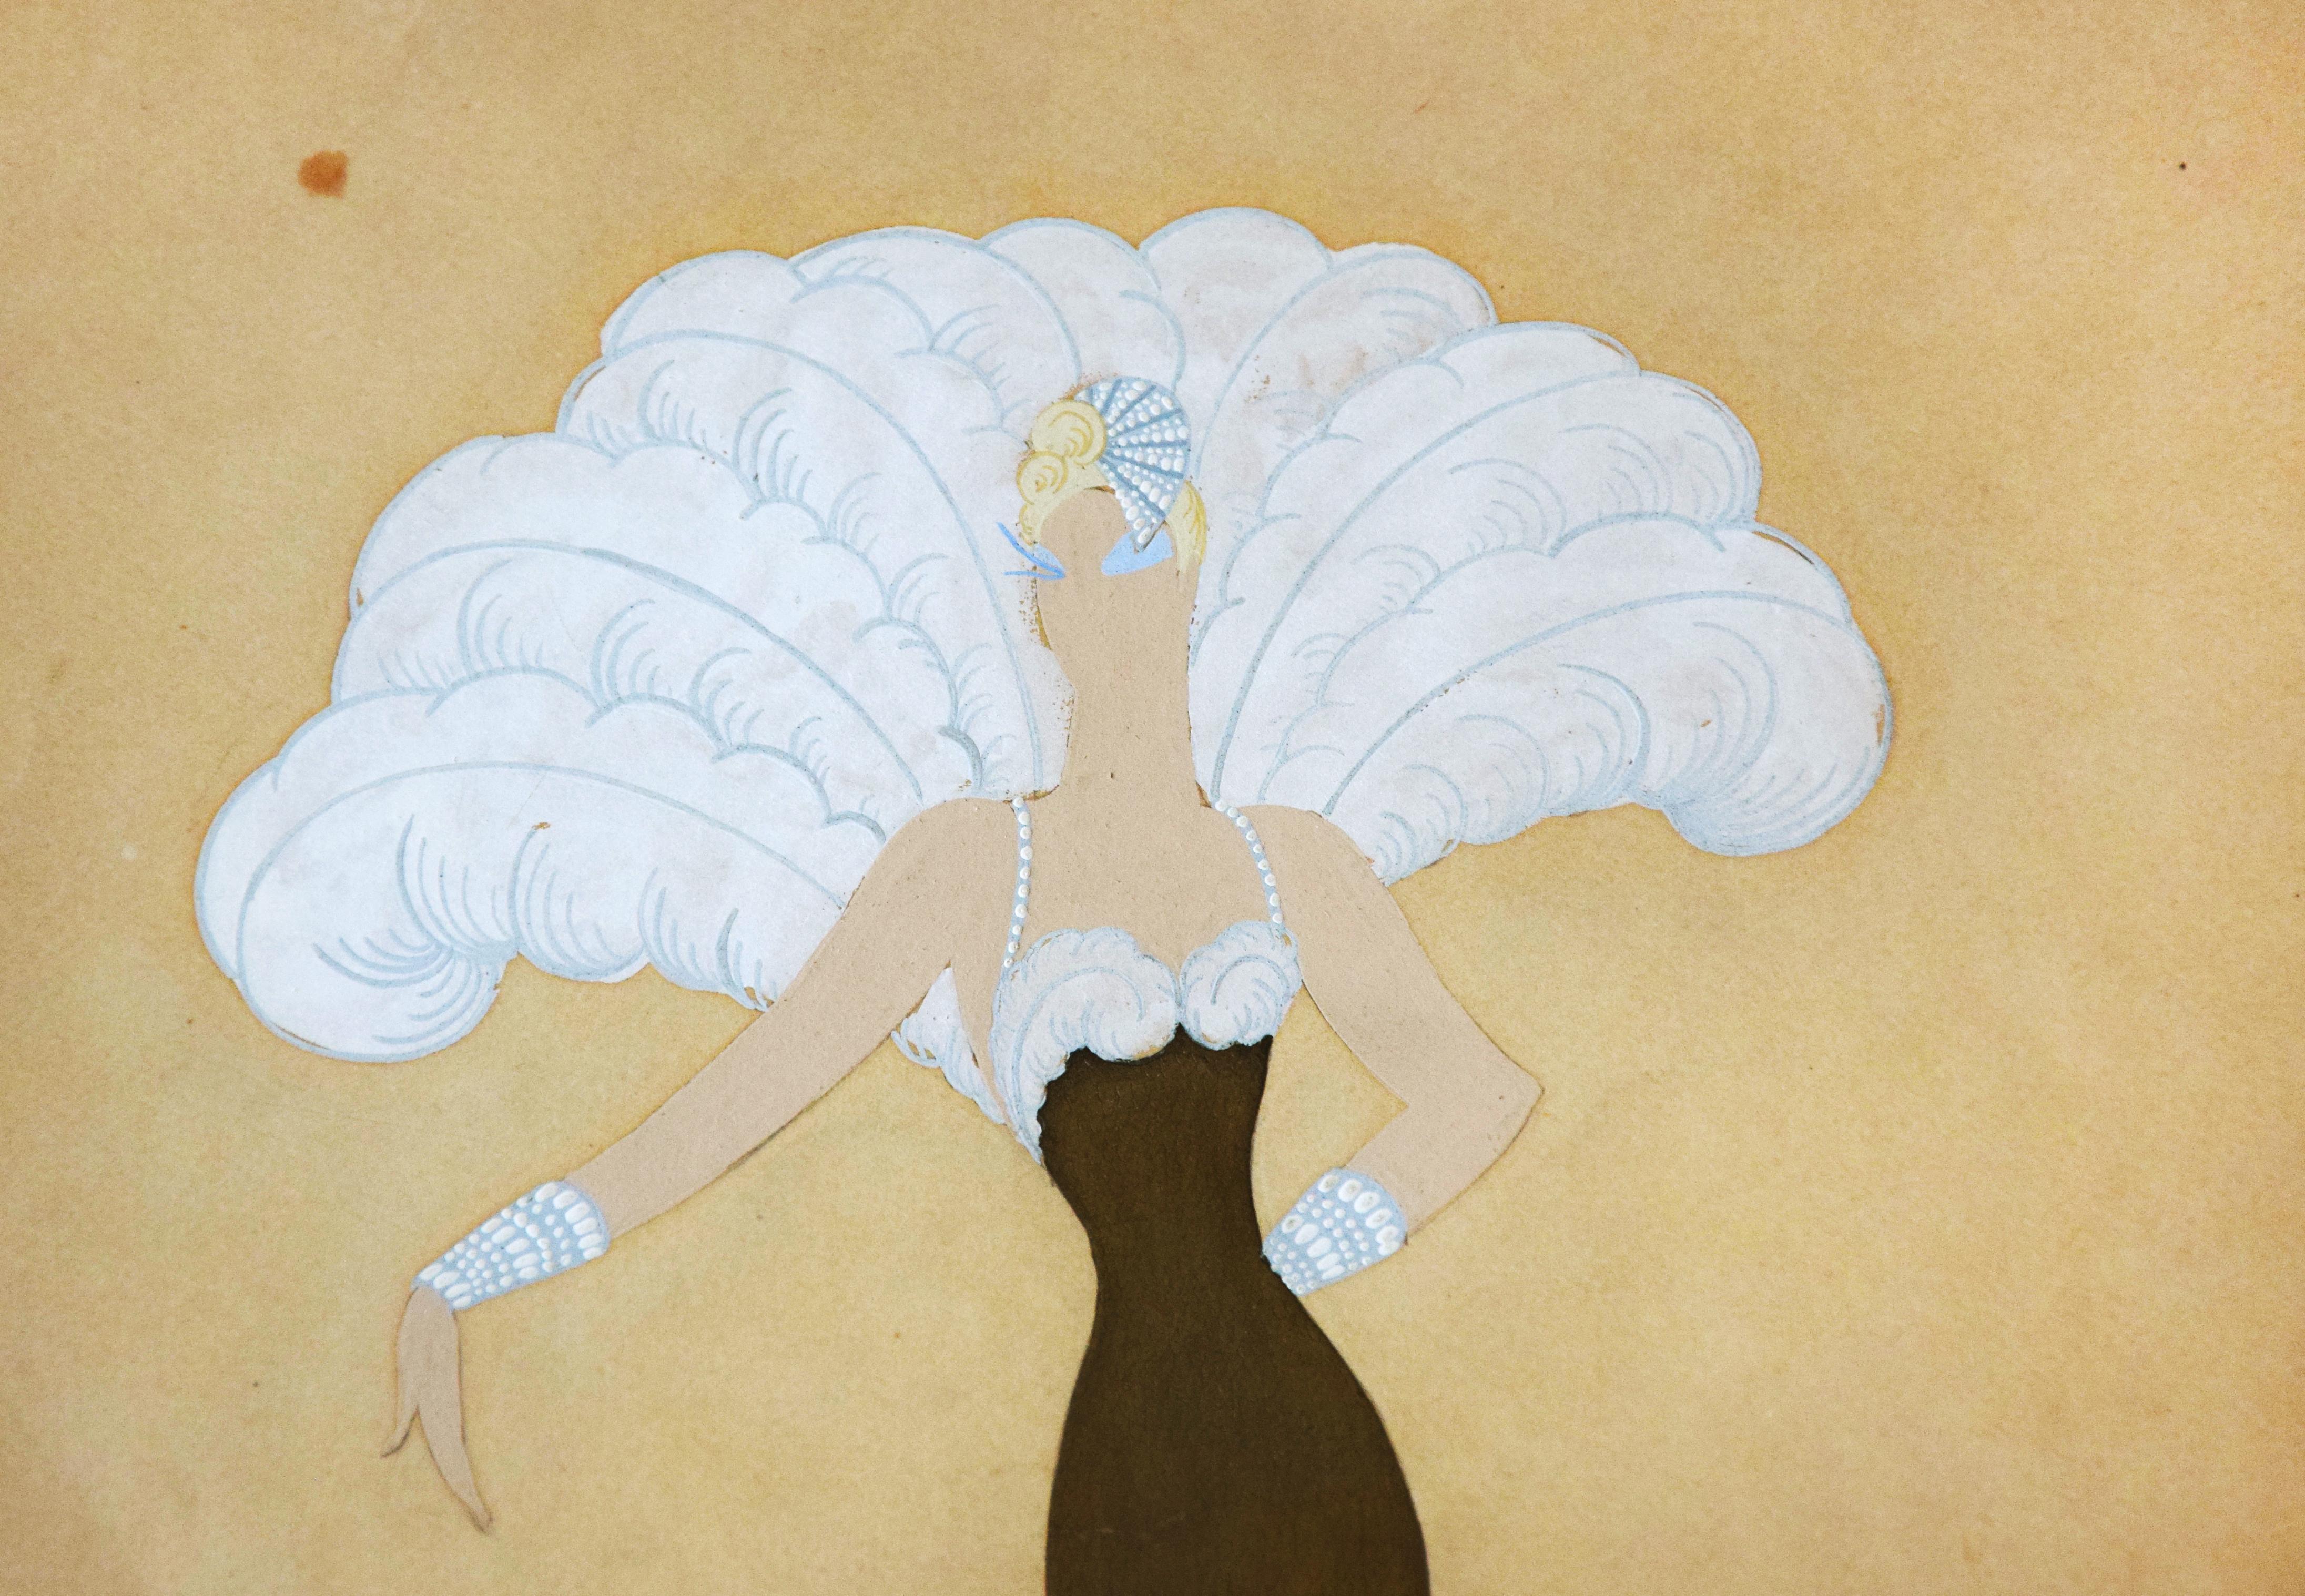 Miss Tapsy - Original Pencil, Markers and Tempera by Erté - 1940s 2